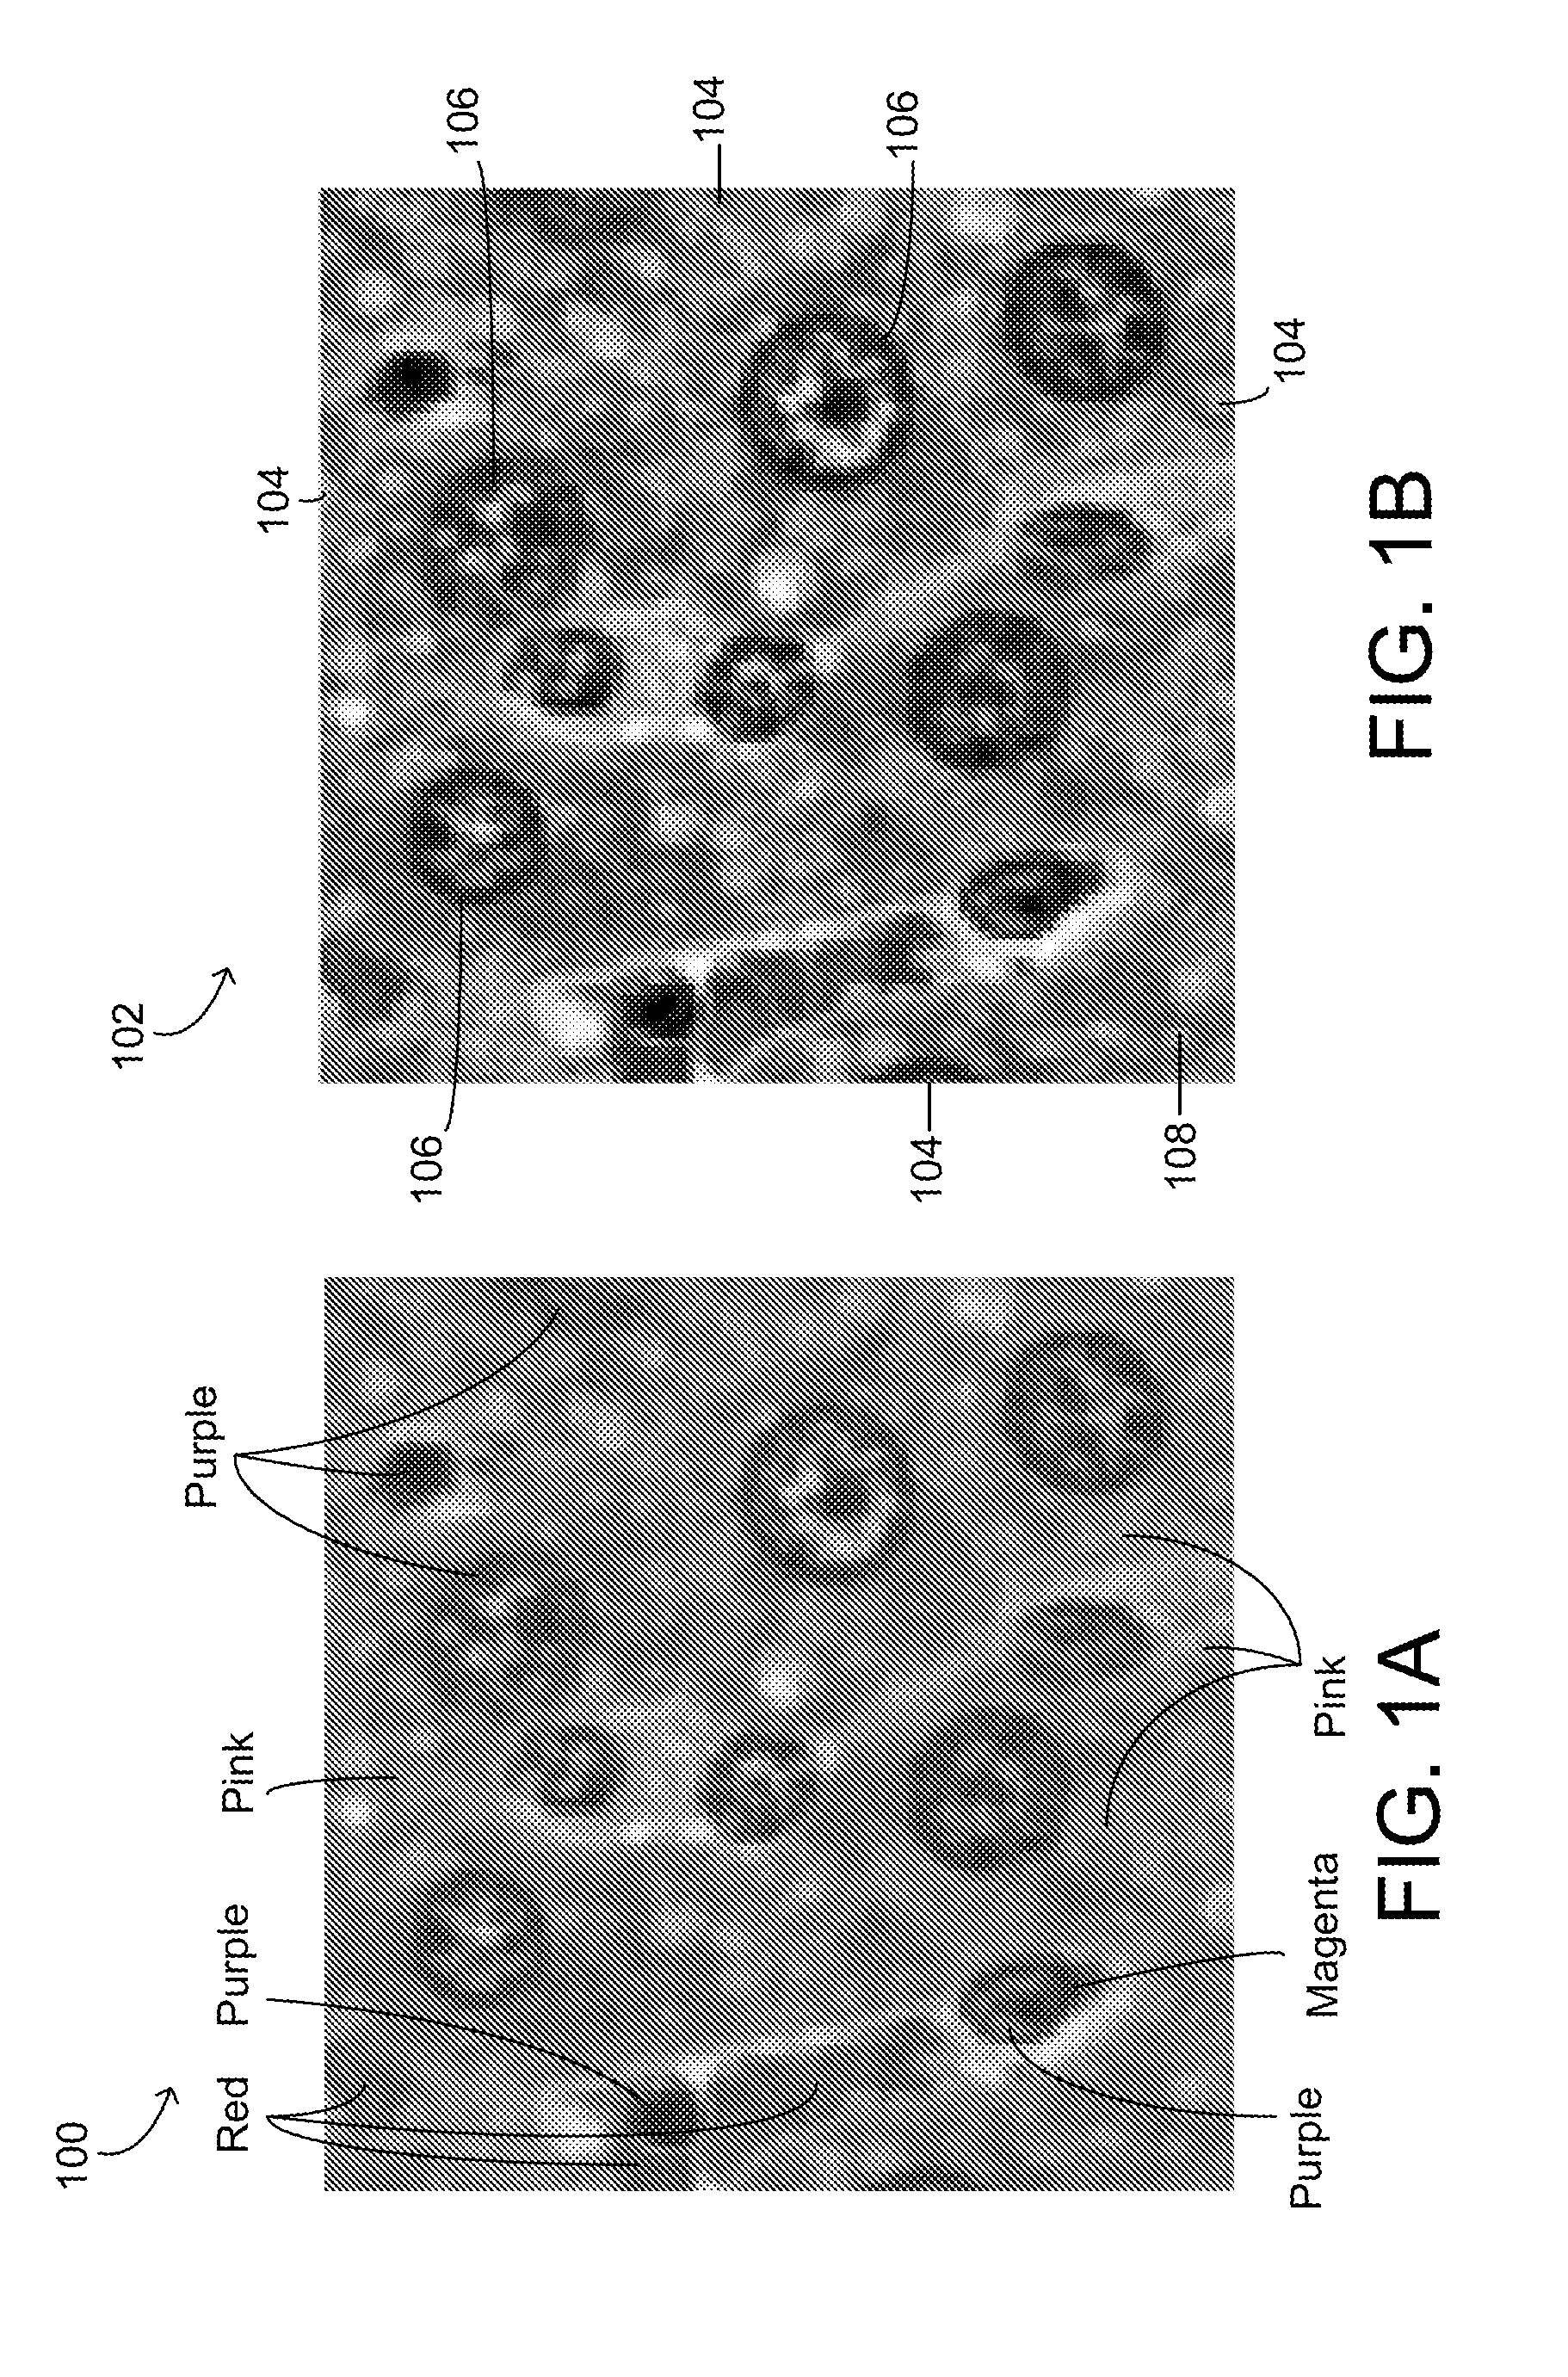 Systems and Methods for Object Identification